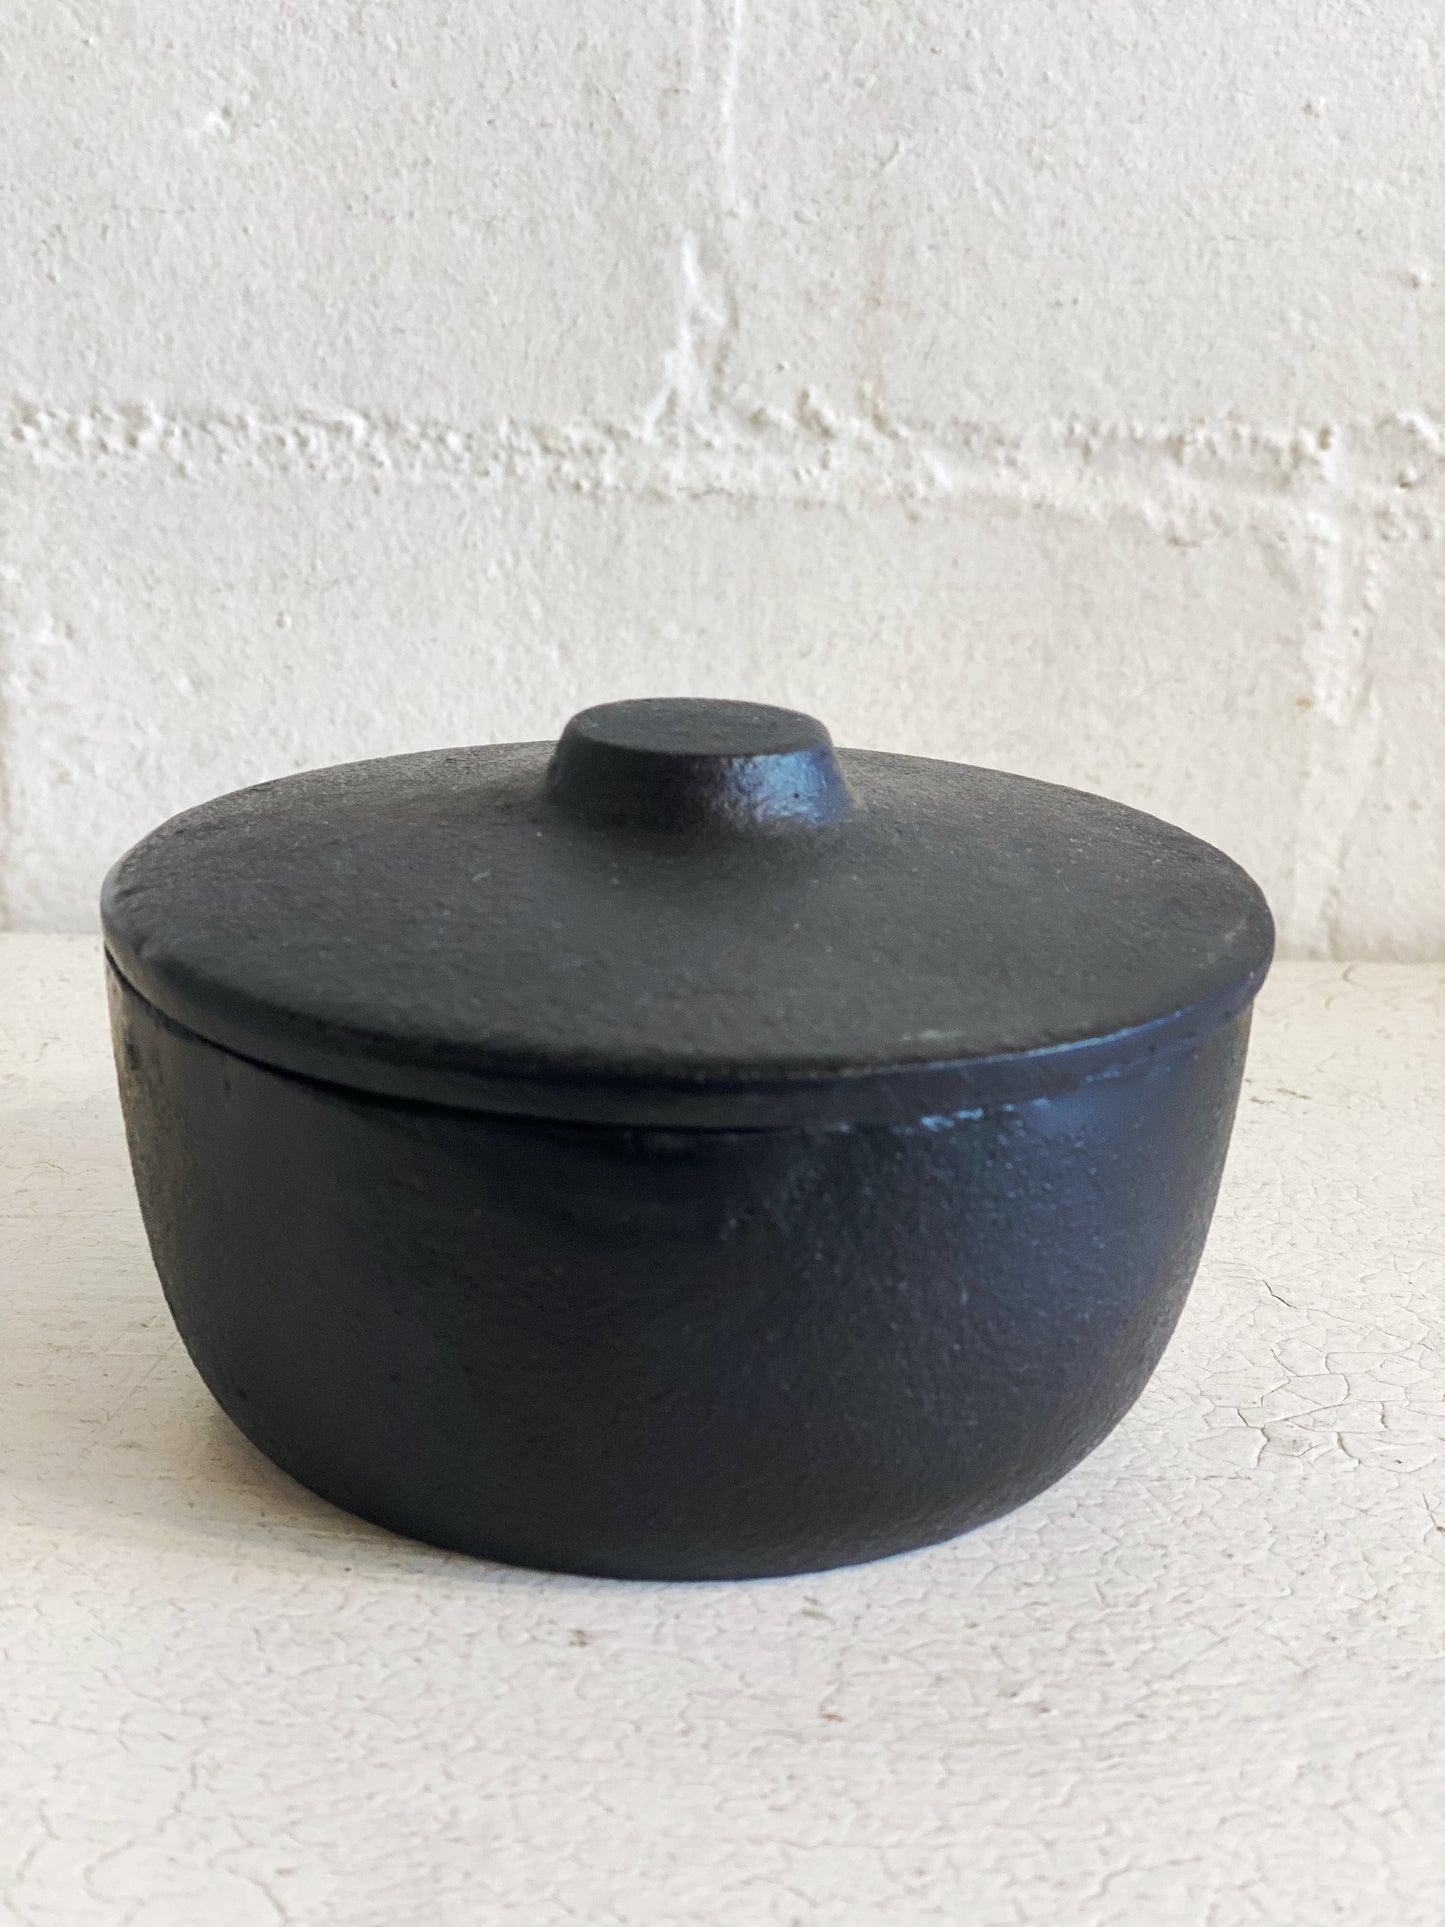 Cast Iron Pot with lid